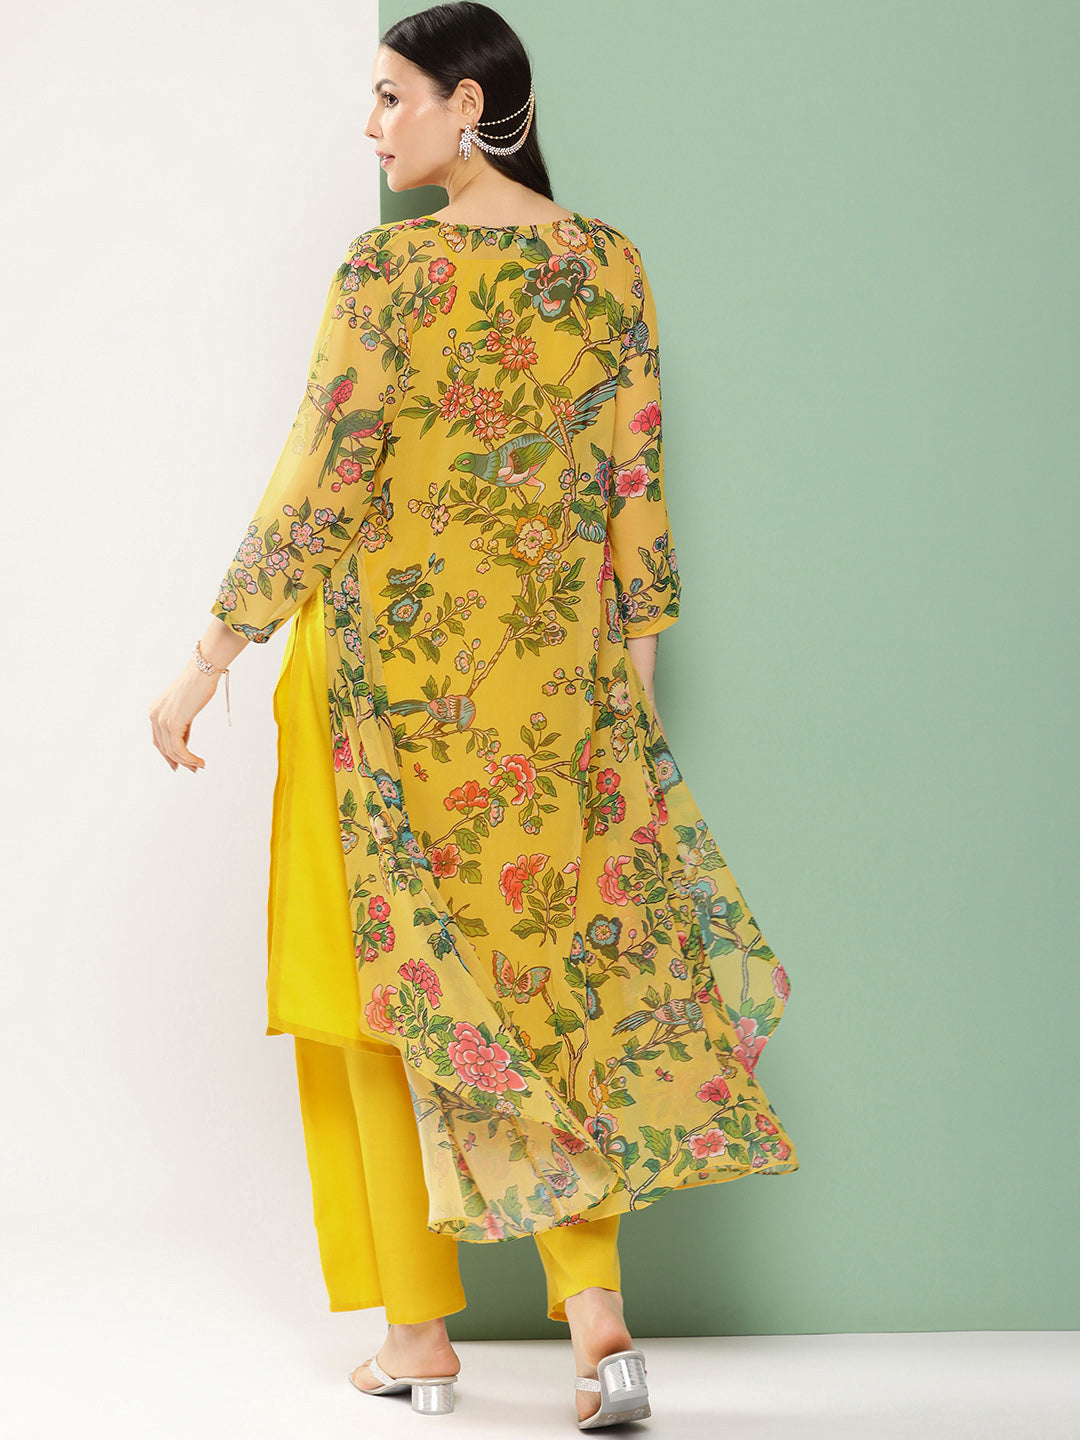 Women's Mustard Floral Printed Jacket, Kurta With Palazzos - Bhama Couture